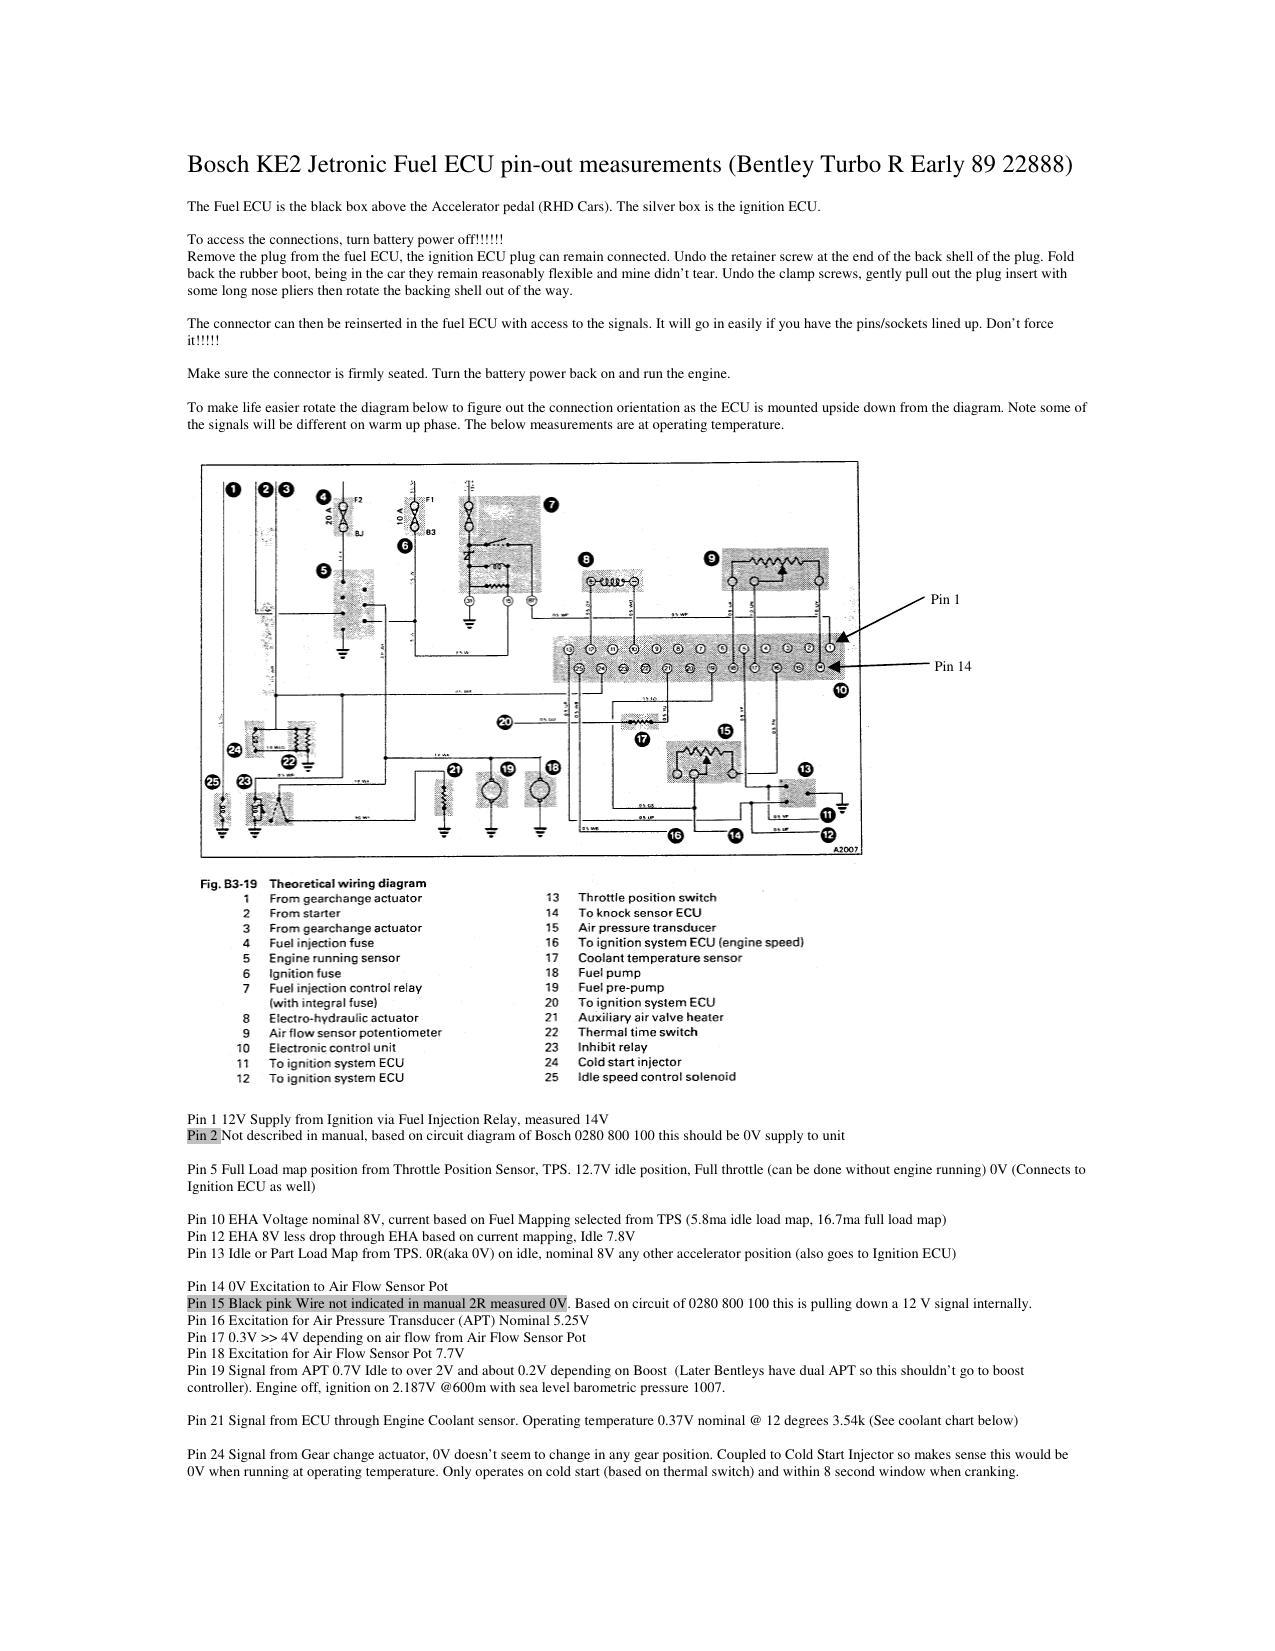 bentley-turbo-r-early-89-22888-fuel-ecu-pin-out-measurements-manual.pdf